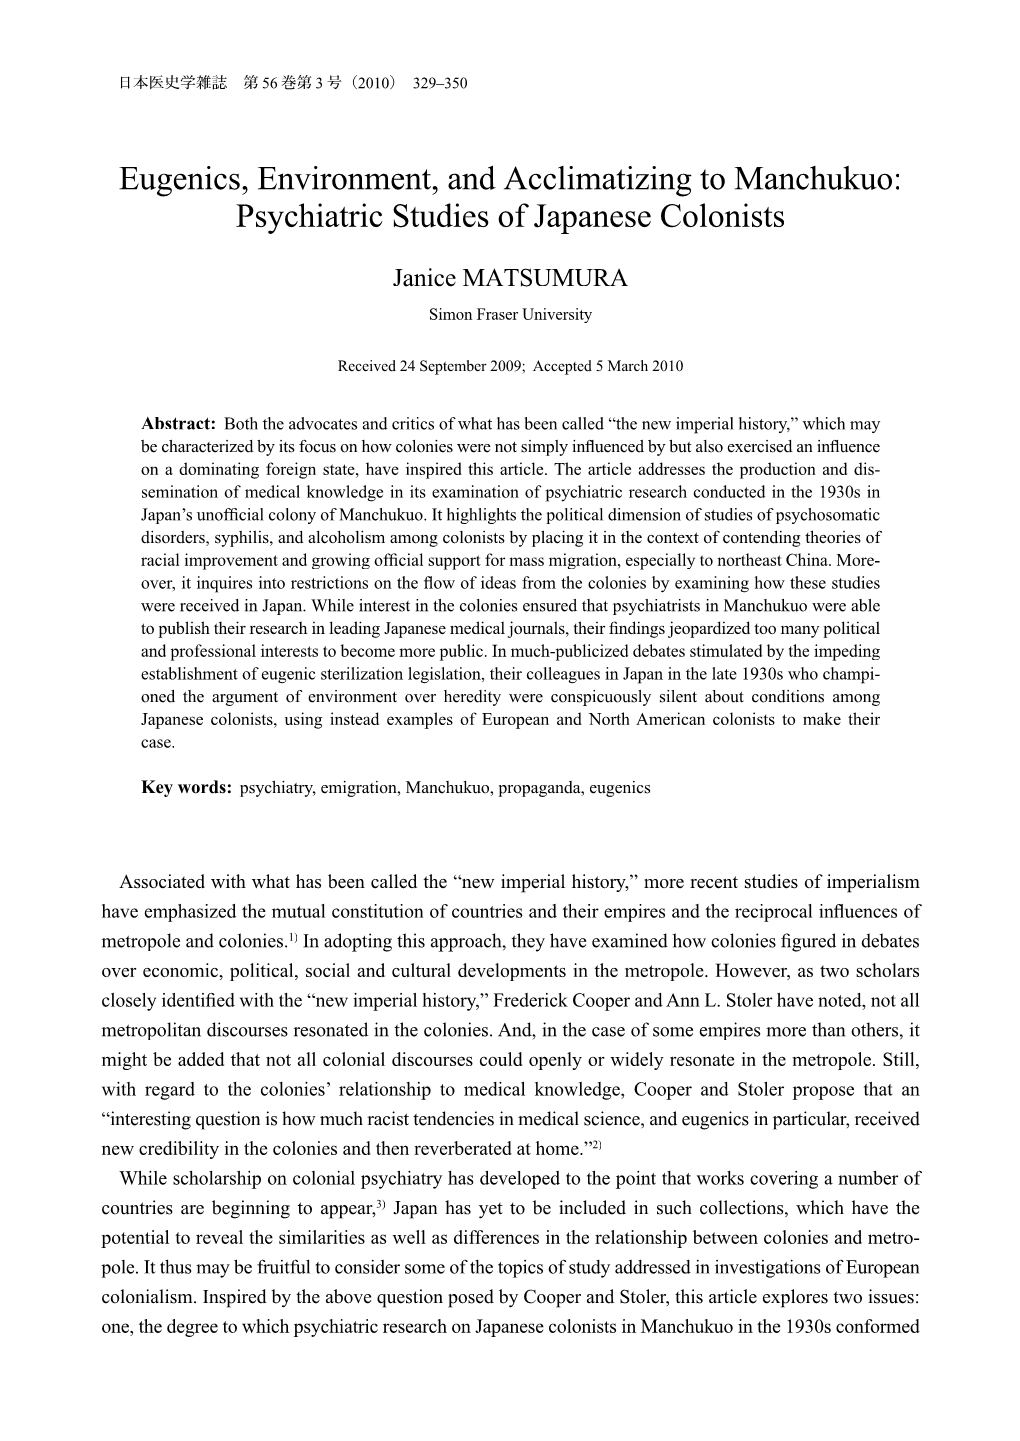 Eugenics, Environment, and Acclimatizing to Manchukuo: Psychiatric Studies of Japanese Colonists